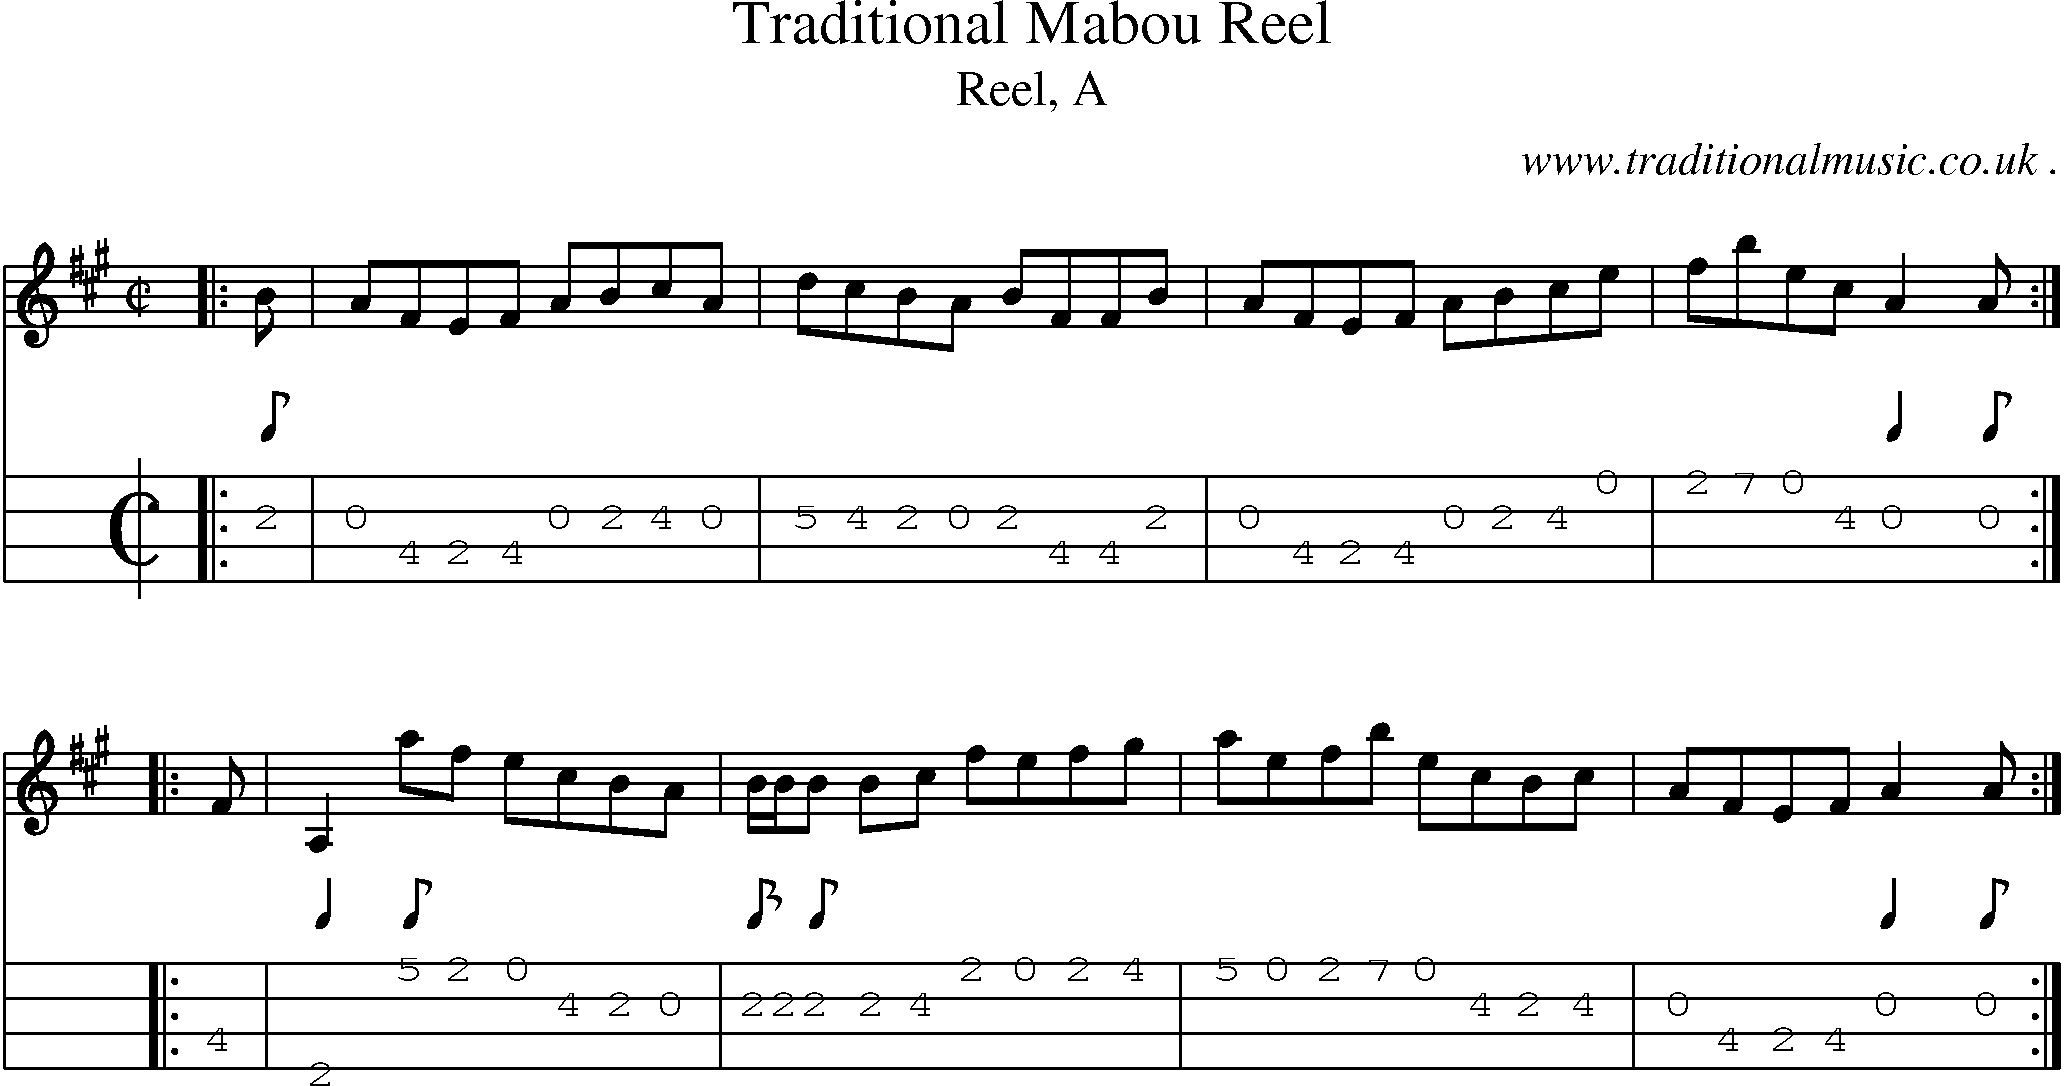 Sheet-music  score, Chords and Mandolin Tabs for Traditional Mabou Reel